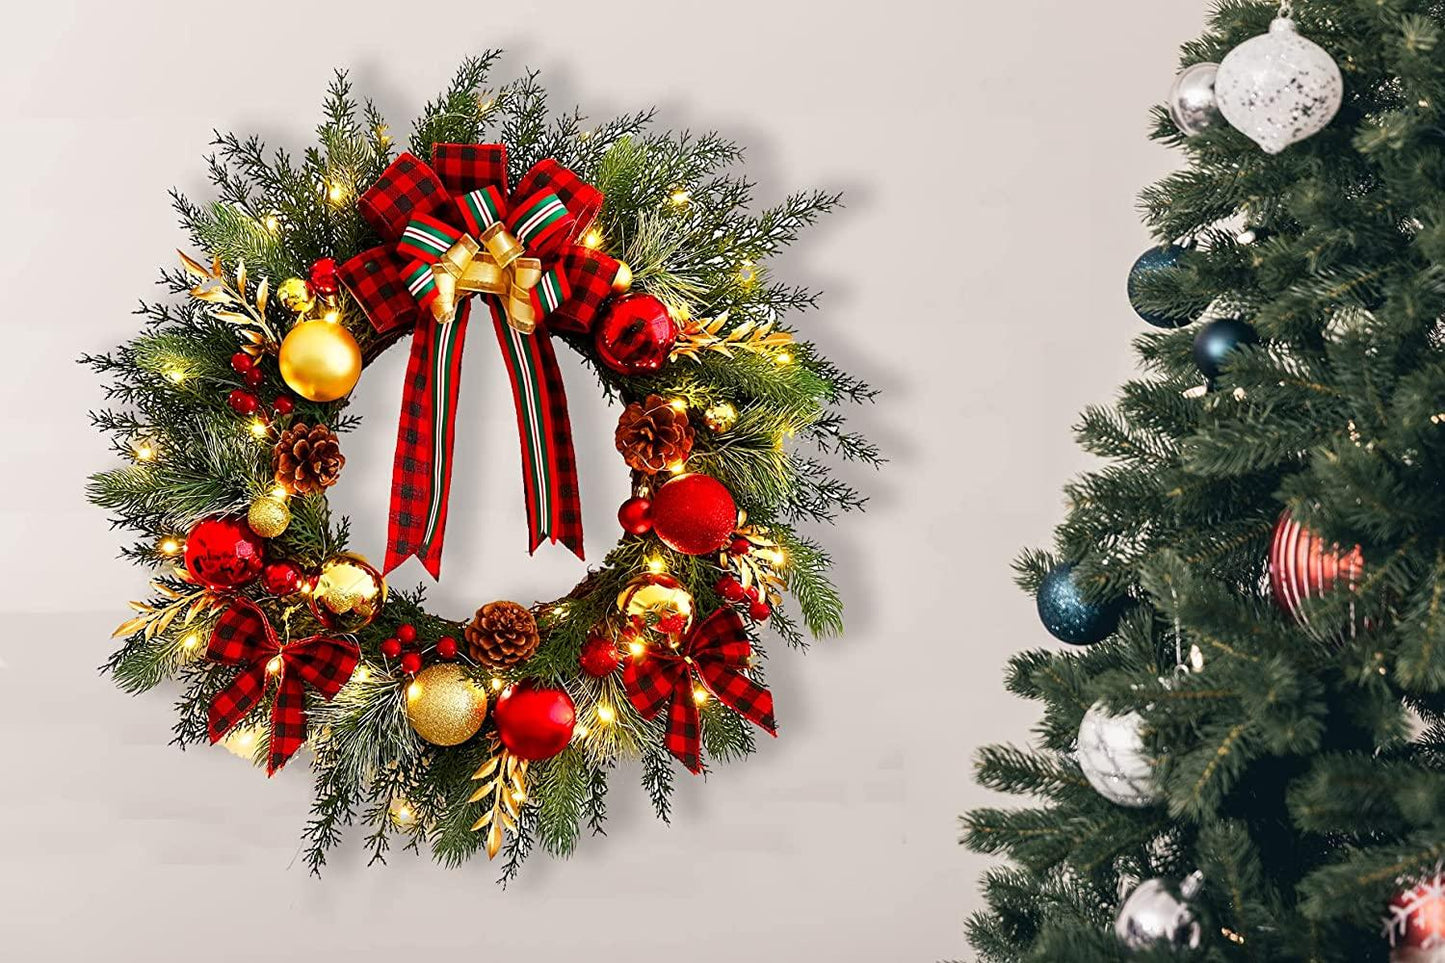 Christmas Wreath with Lights 20 Inch Pre-Lit Christmas Door Wreath for Front Door with Red Plaid Bow and Ball Ornaments